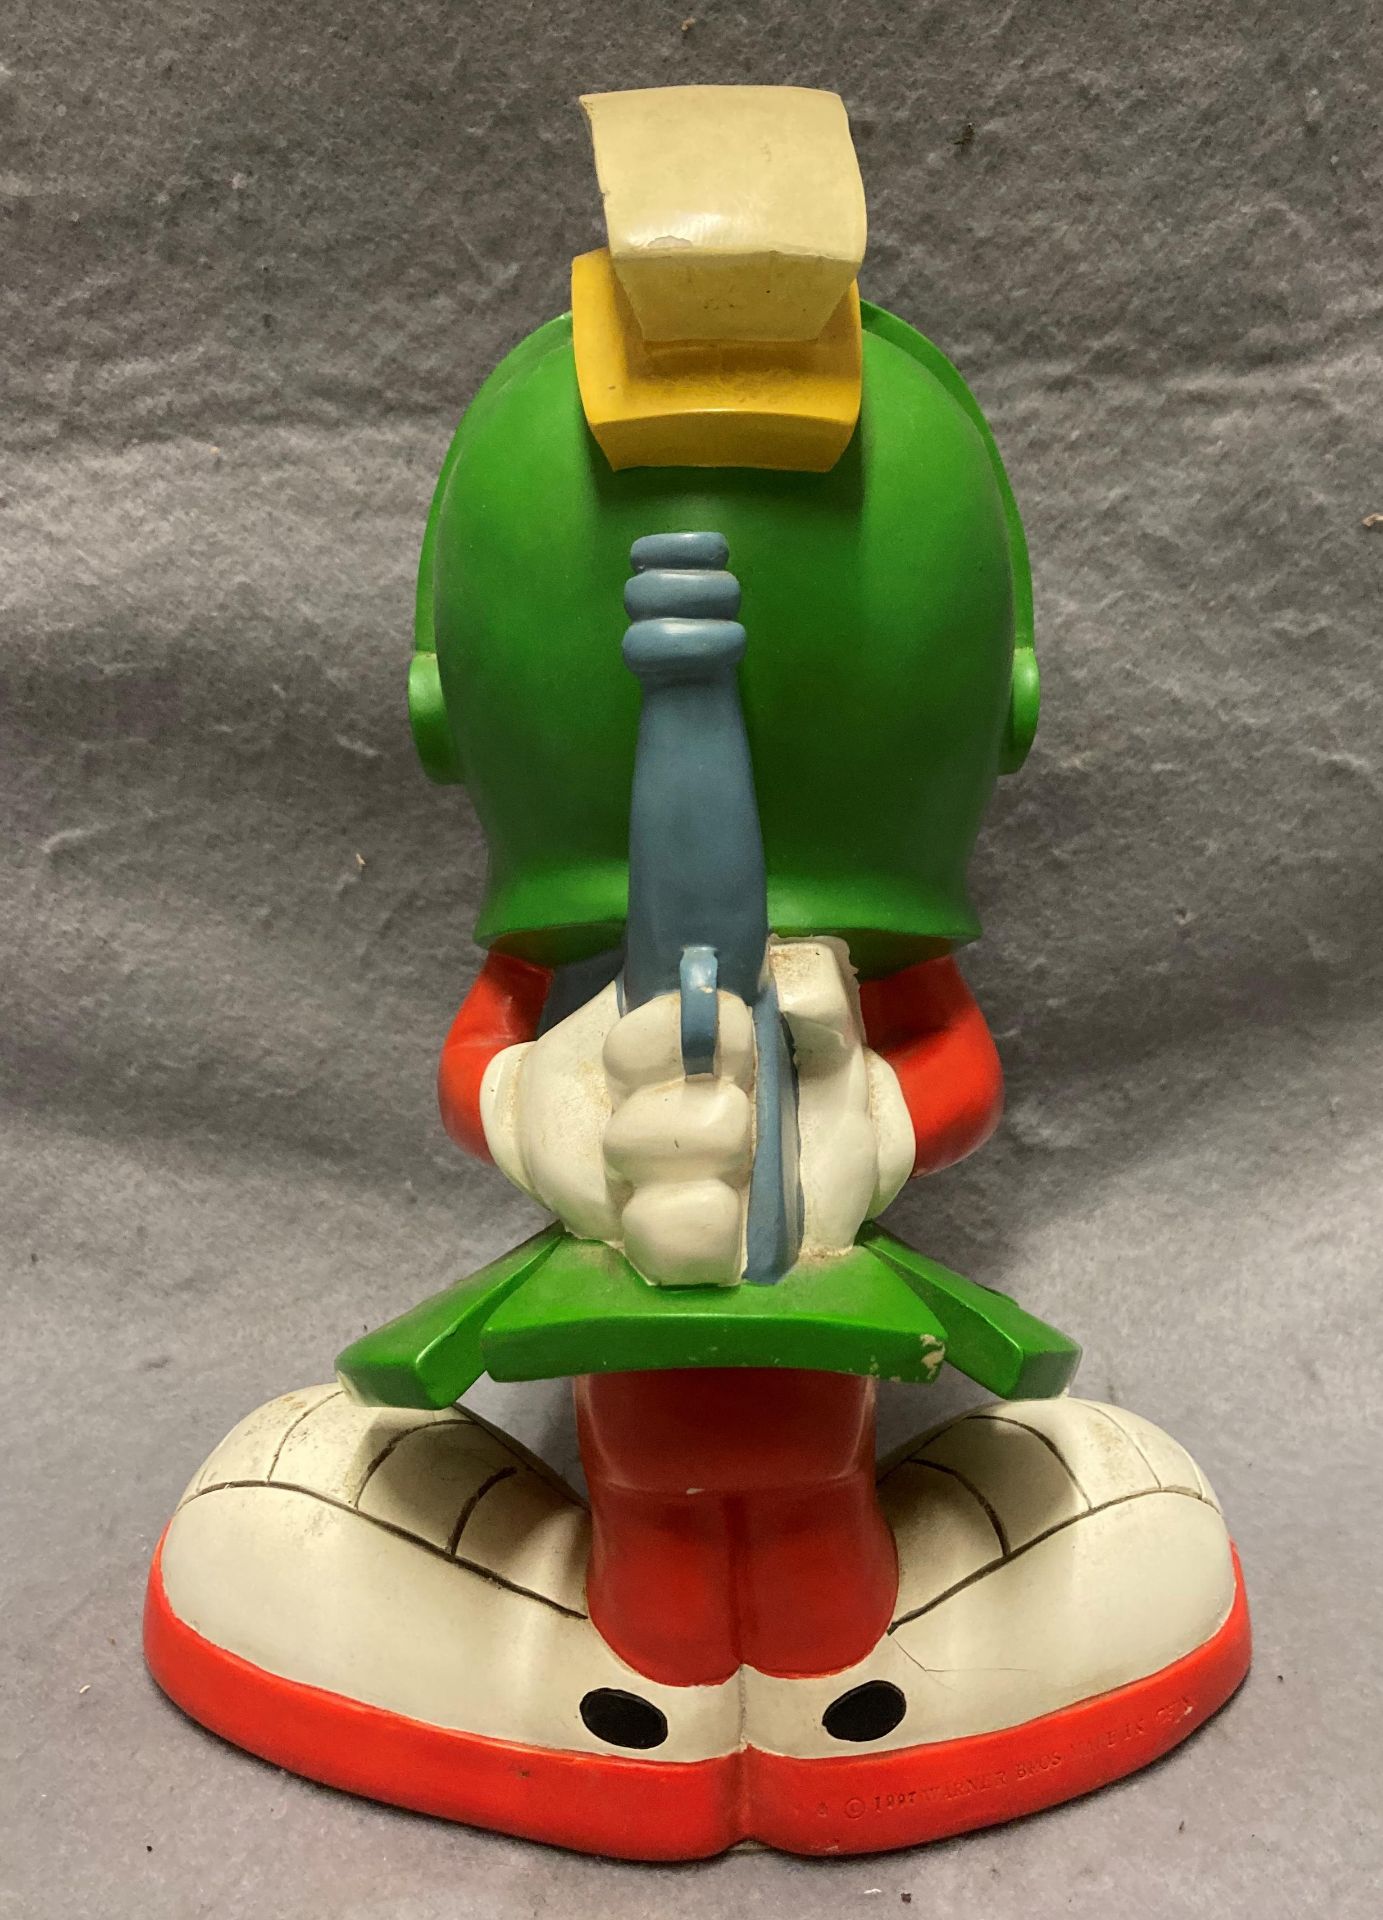 Warner Brothers model of Marvin the Martian, - Image 6 of 8